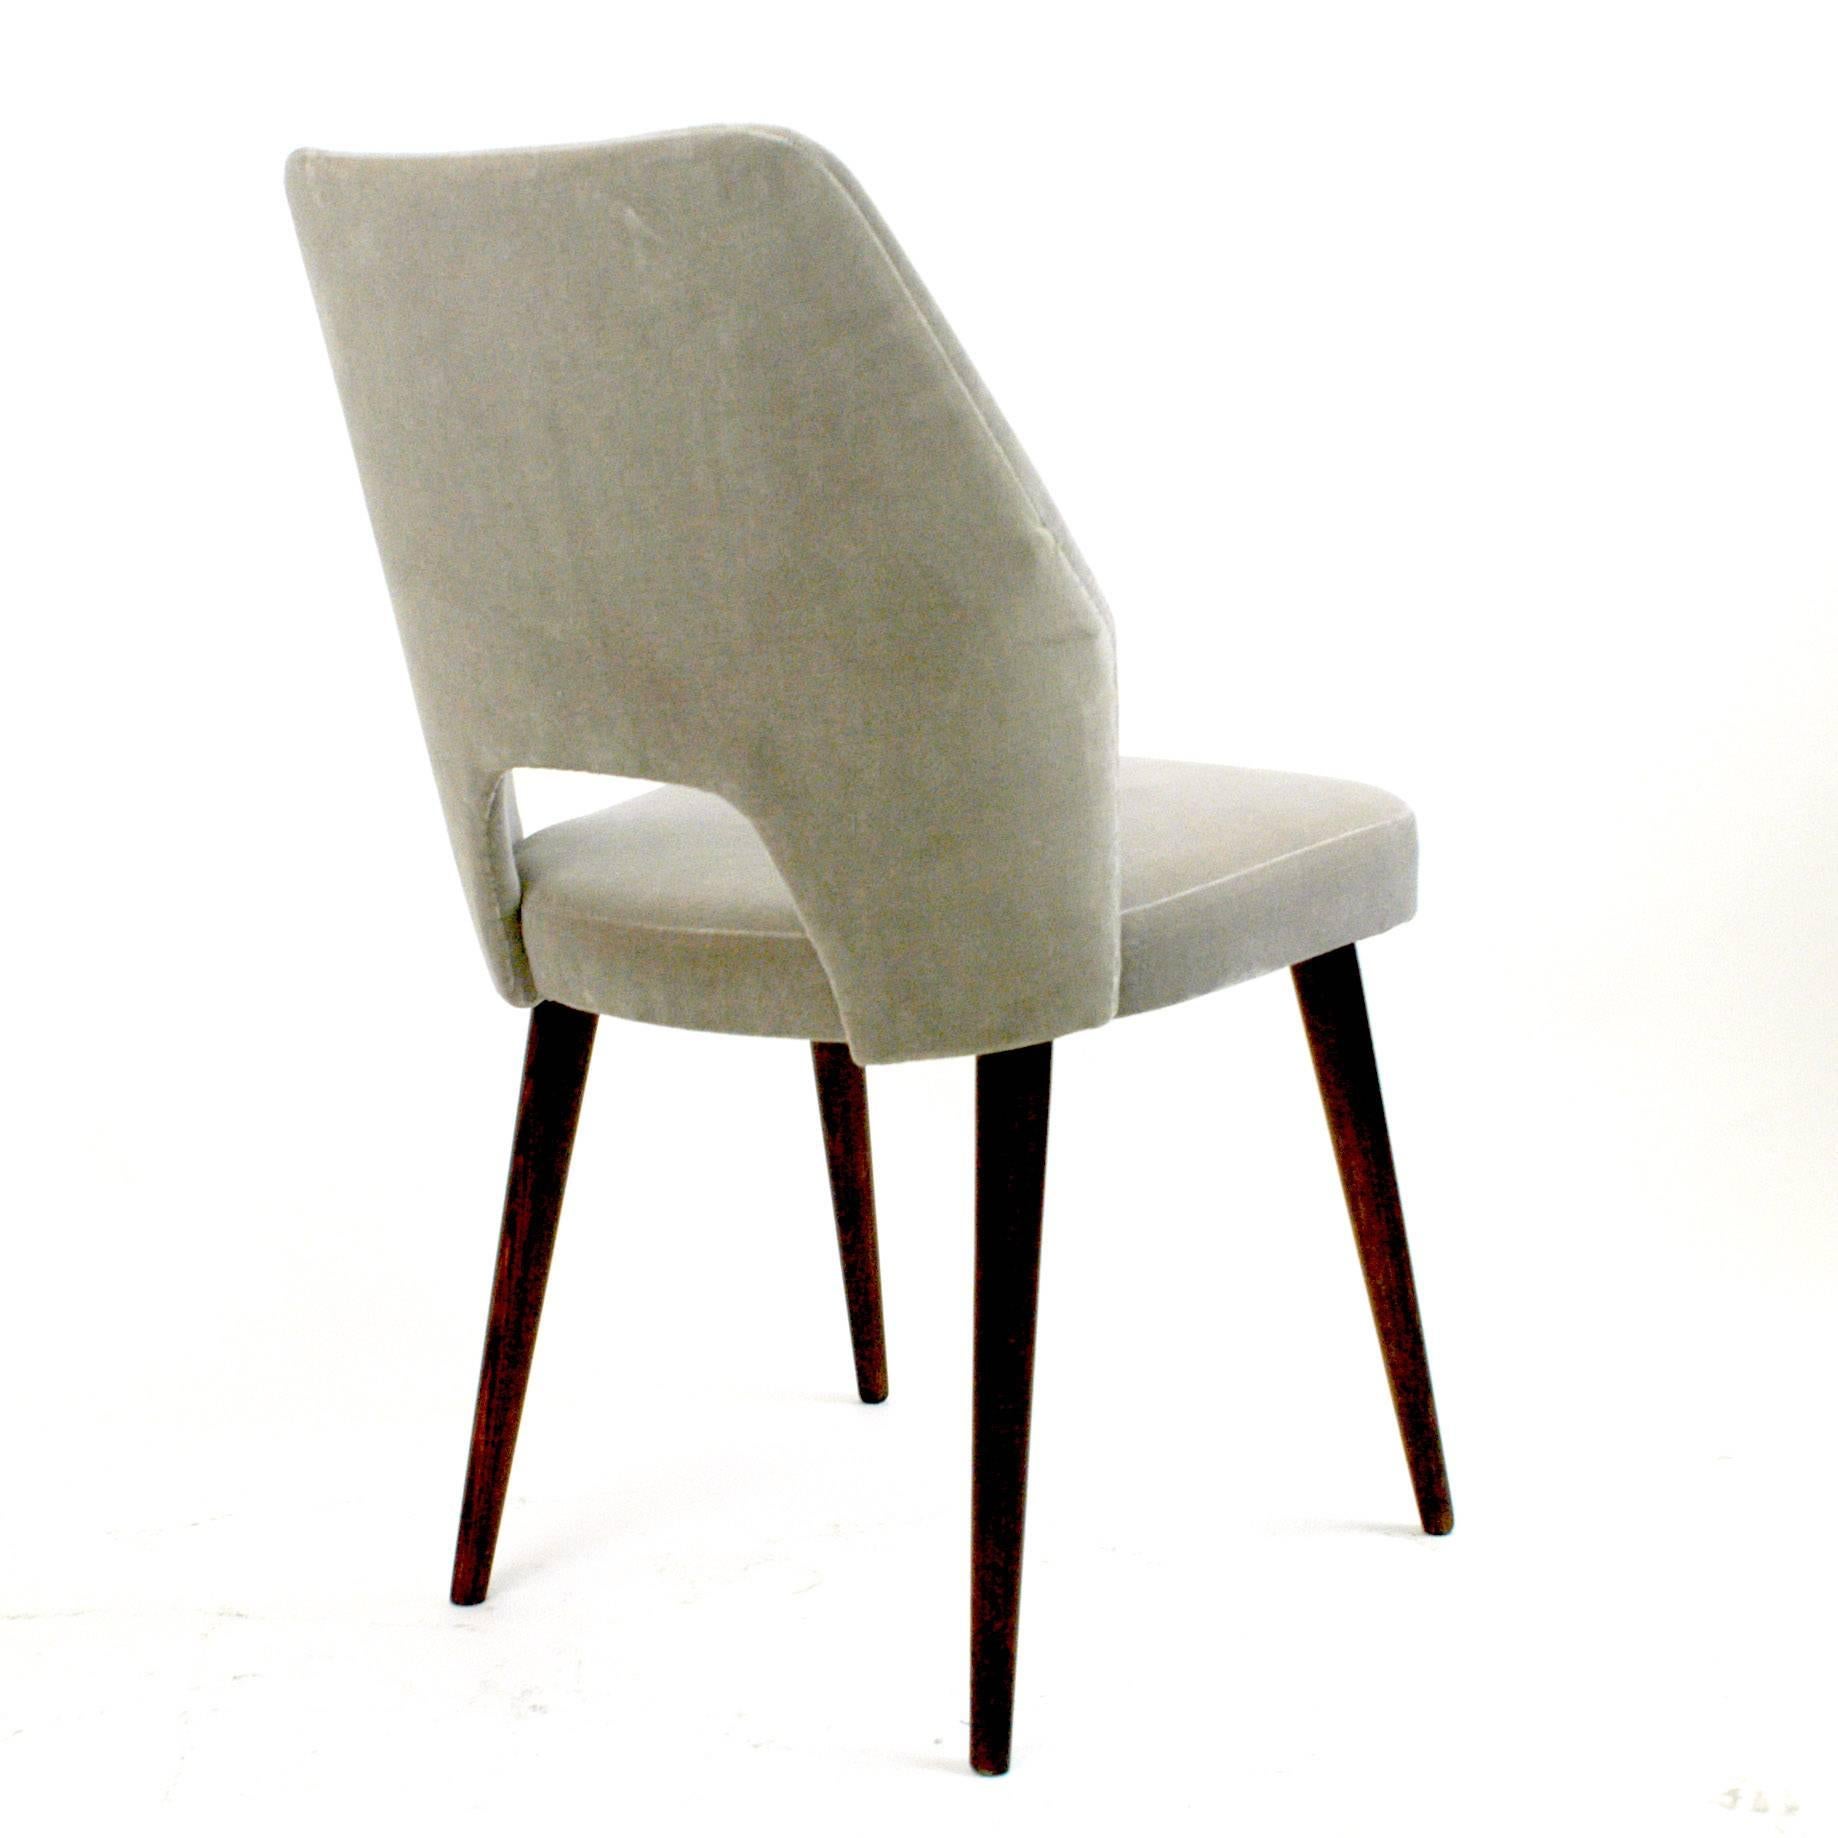 Elegant and comfortable dining or side chair, completely restored and reupholstered with excellent new Kvadrat Velvet by Raf Simons.
It has been produced by TON Czech Republic, formerly wellknown as Thonet. The color of the velvet has a slightly